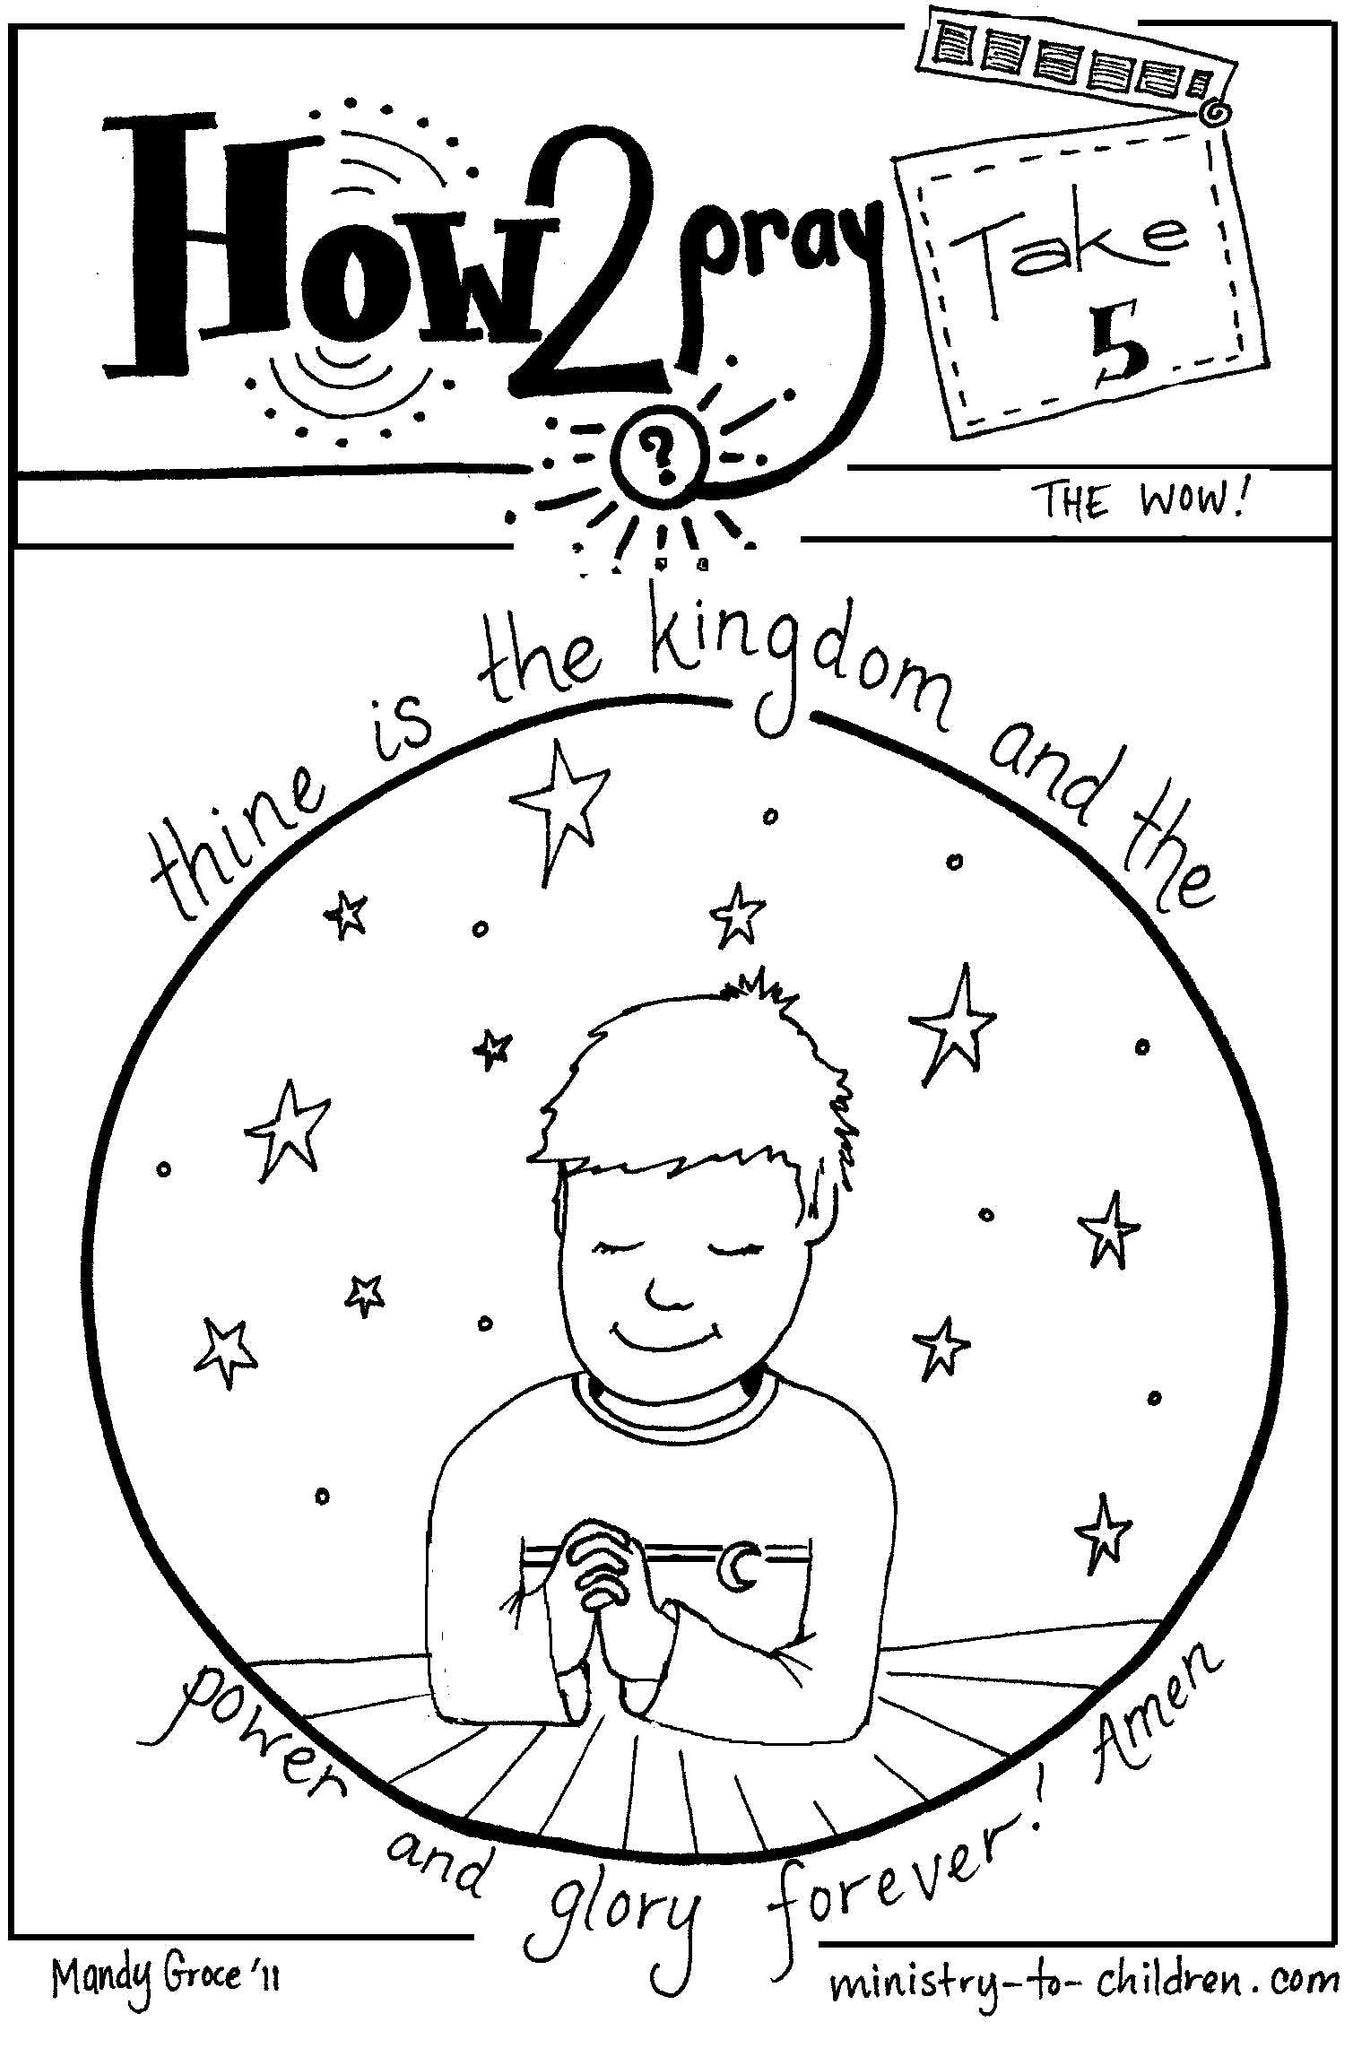 the-lord-s-prayer-coloring-book-for-kids-free-5-pages-download-only